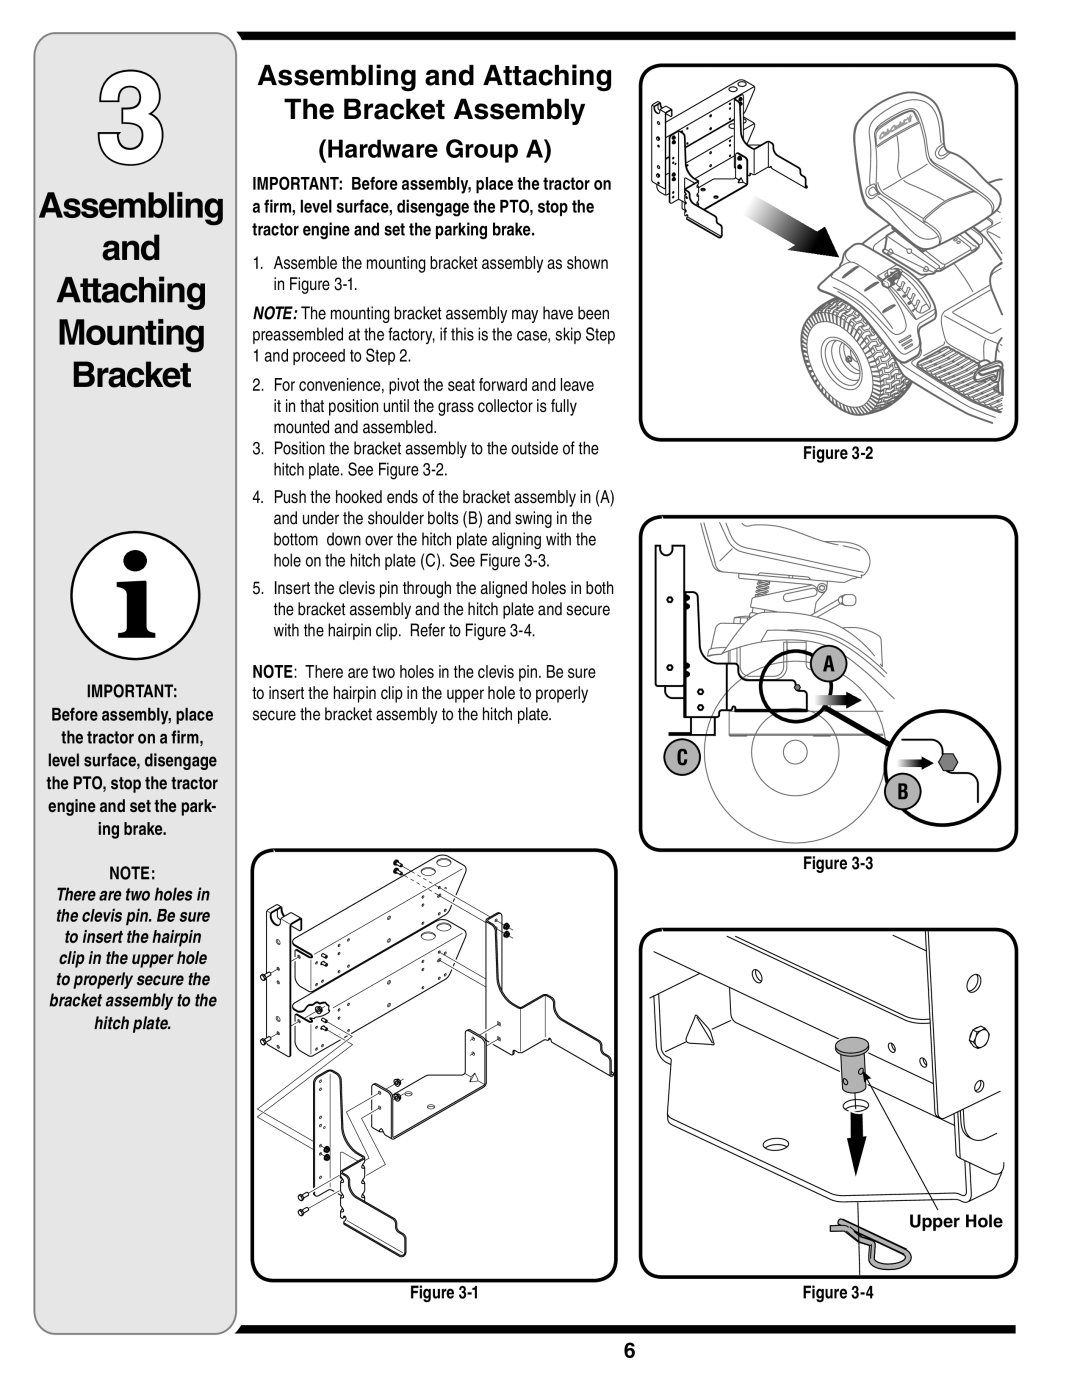 Cub Cadet 19A70001000 warranty Assembling and Attaching Mounting Bracket, Hardware Group A, A C B, Upper Hole 